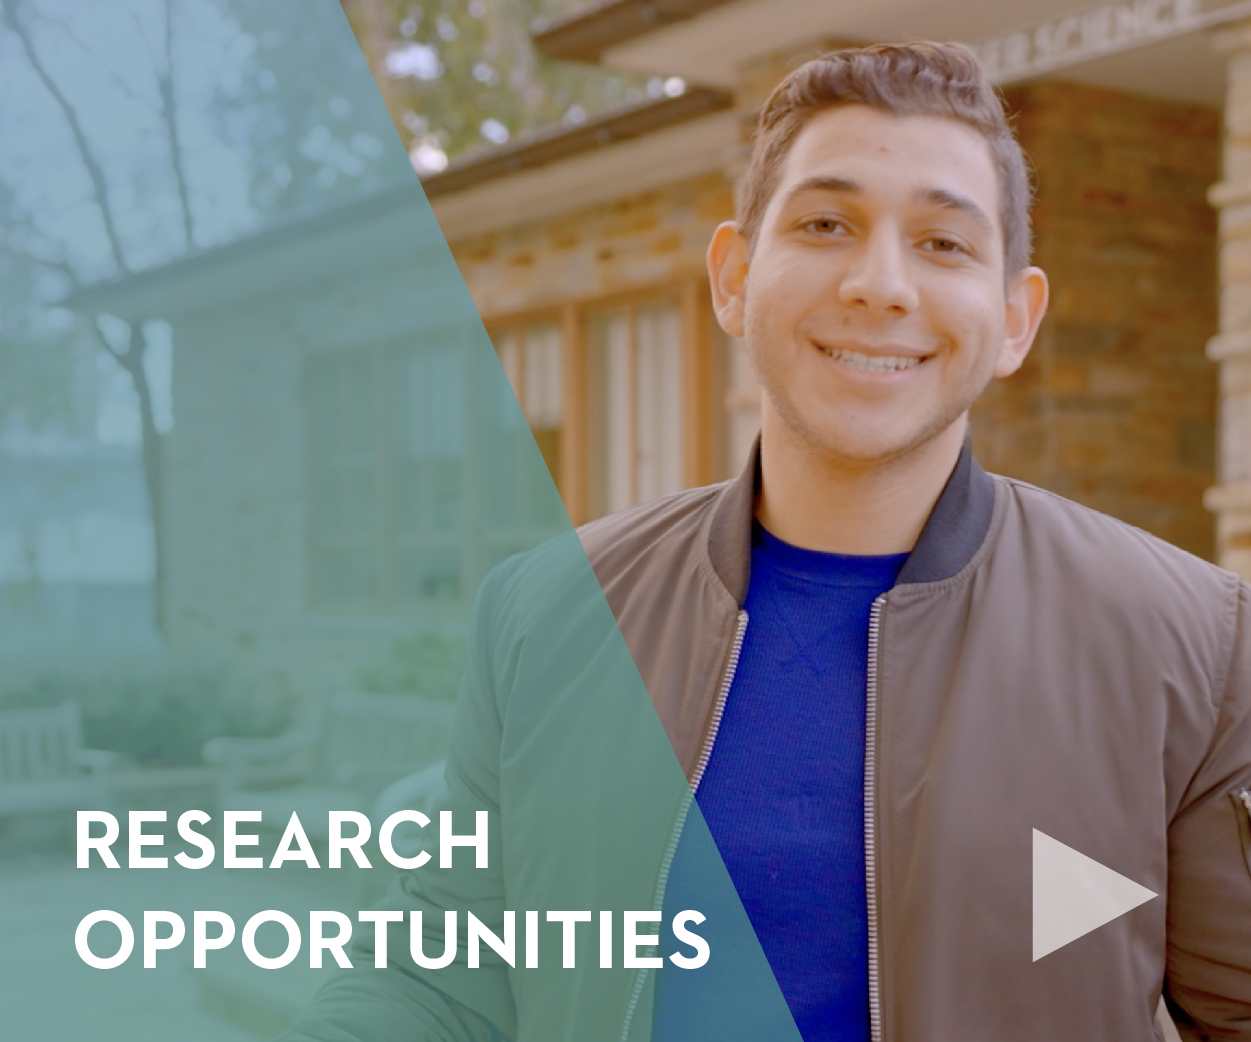 Research opportunities - video play button